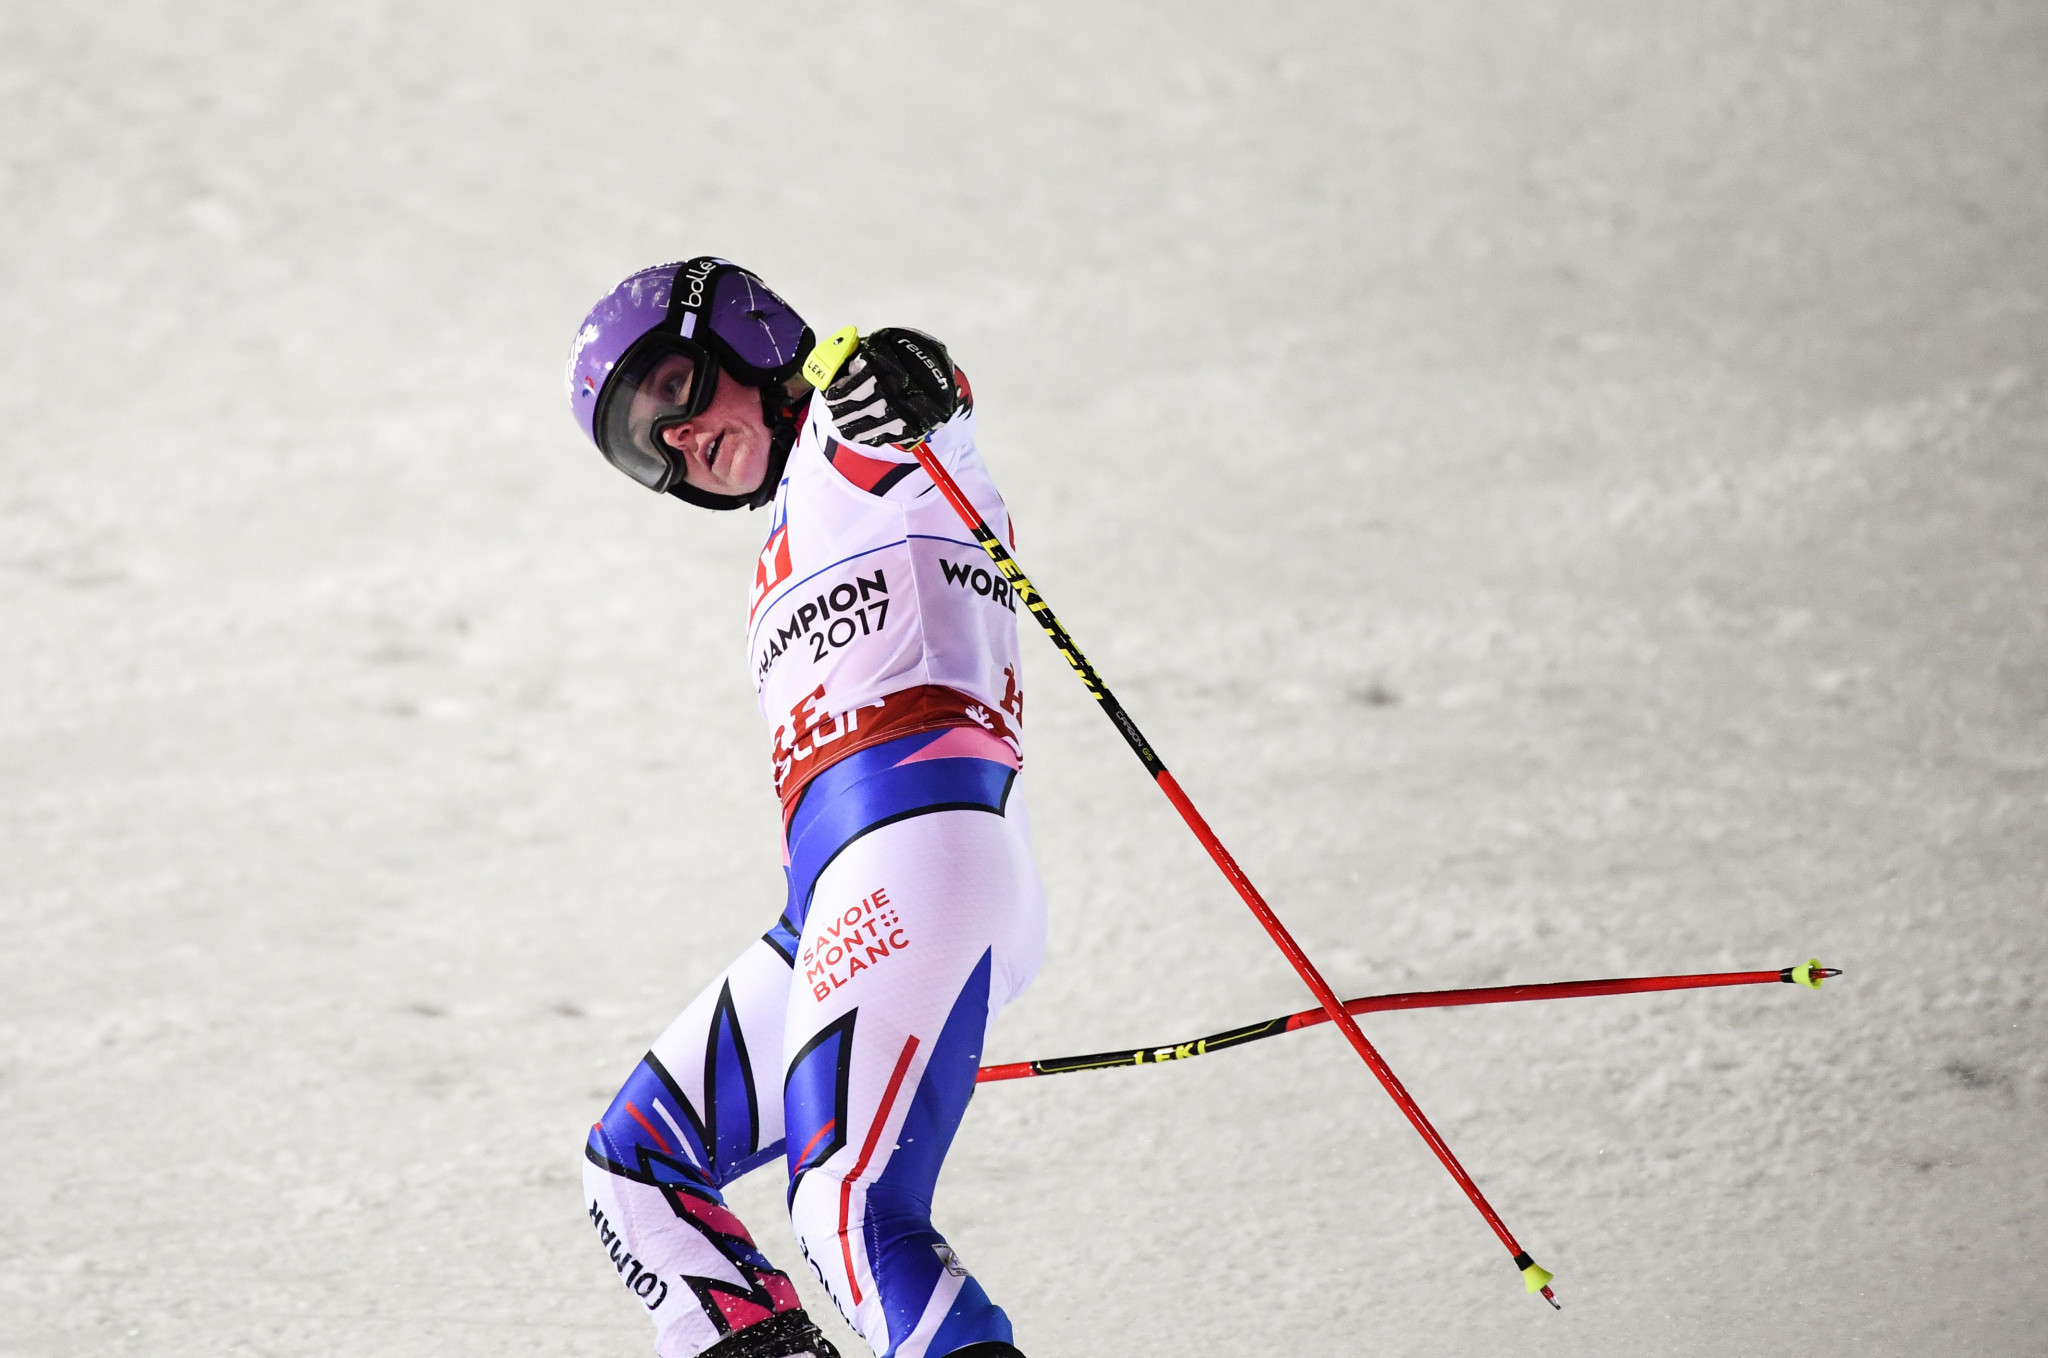 The defending champion Tessa Worley managed only the 12th fastest second run and finished sixth overall ©Getty Images